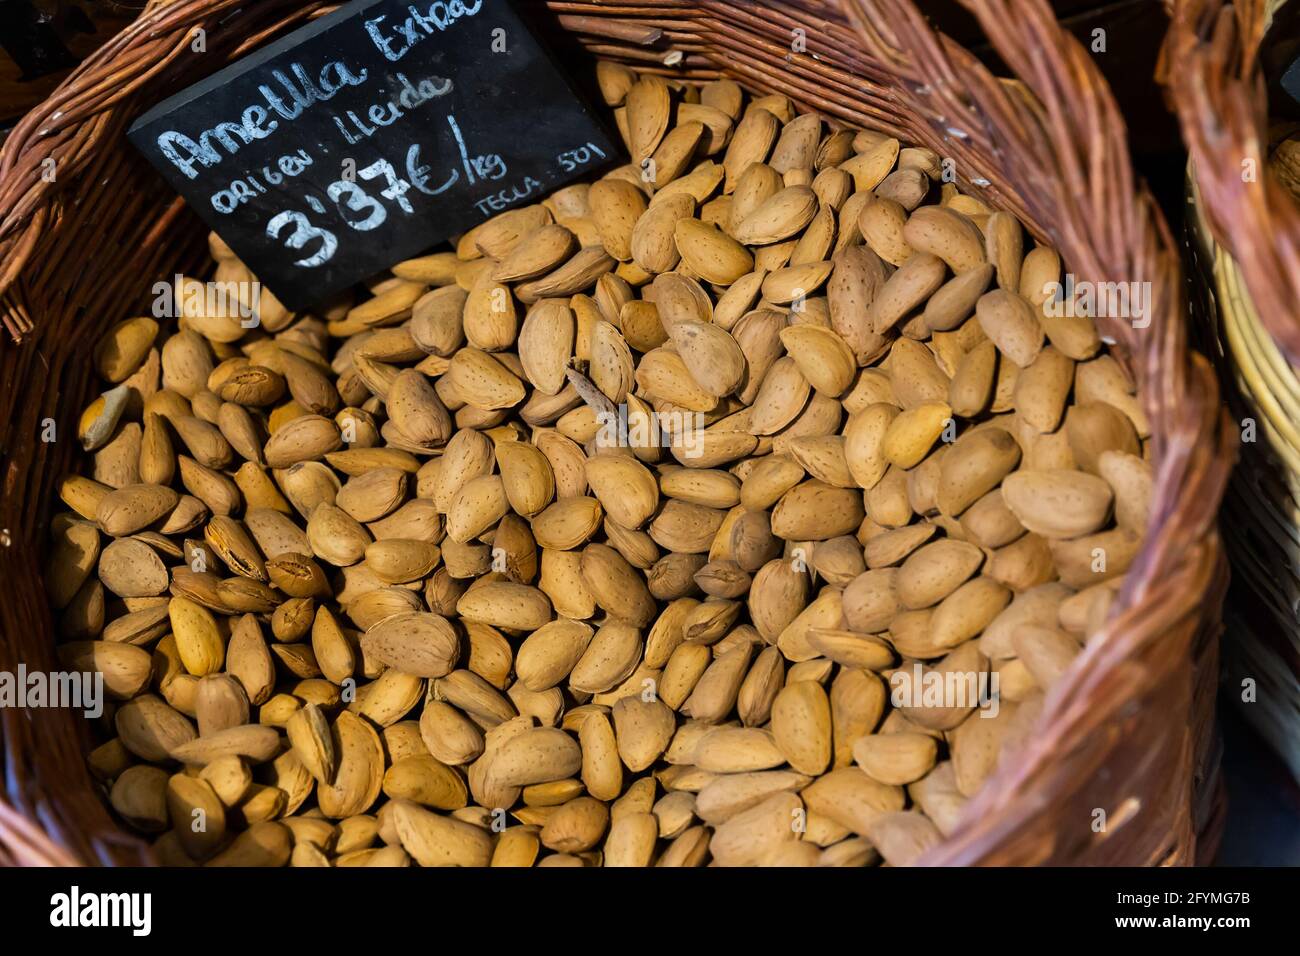 Closeup of dried almonds in shell in wicker basket with price tag in Catalan  for sale on market Stock Photo - Alamy